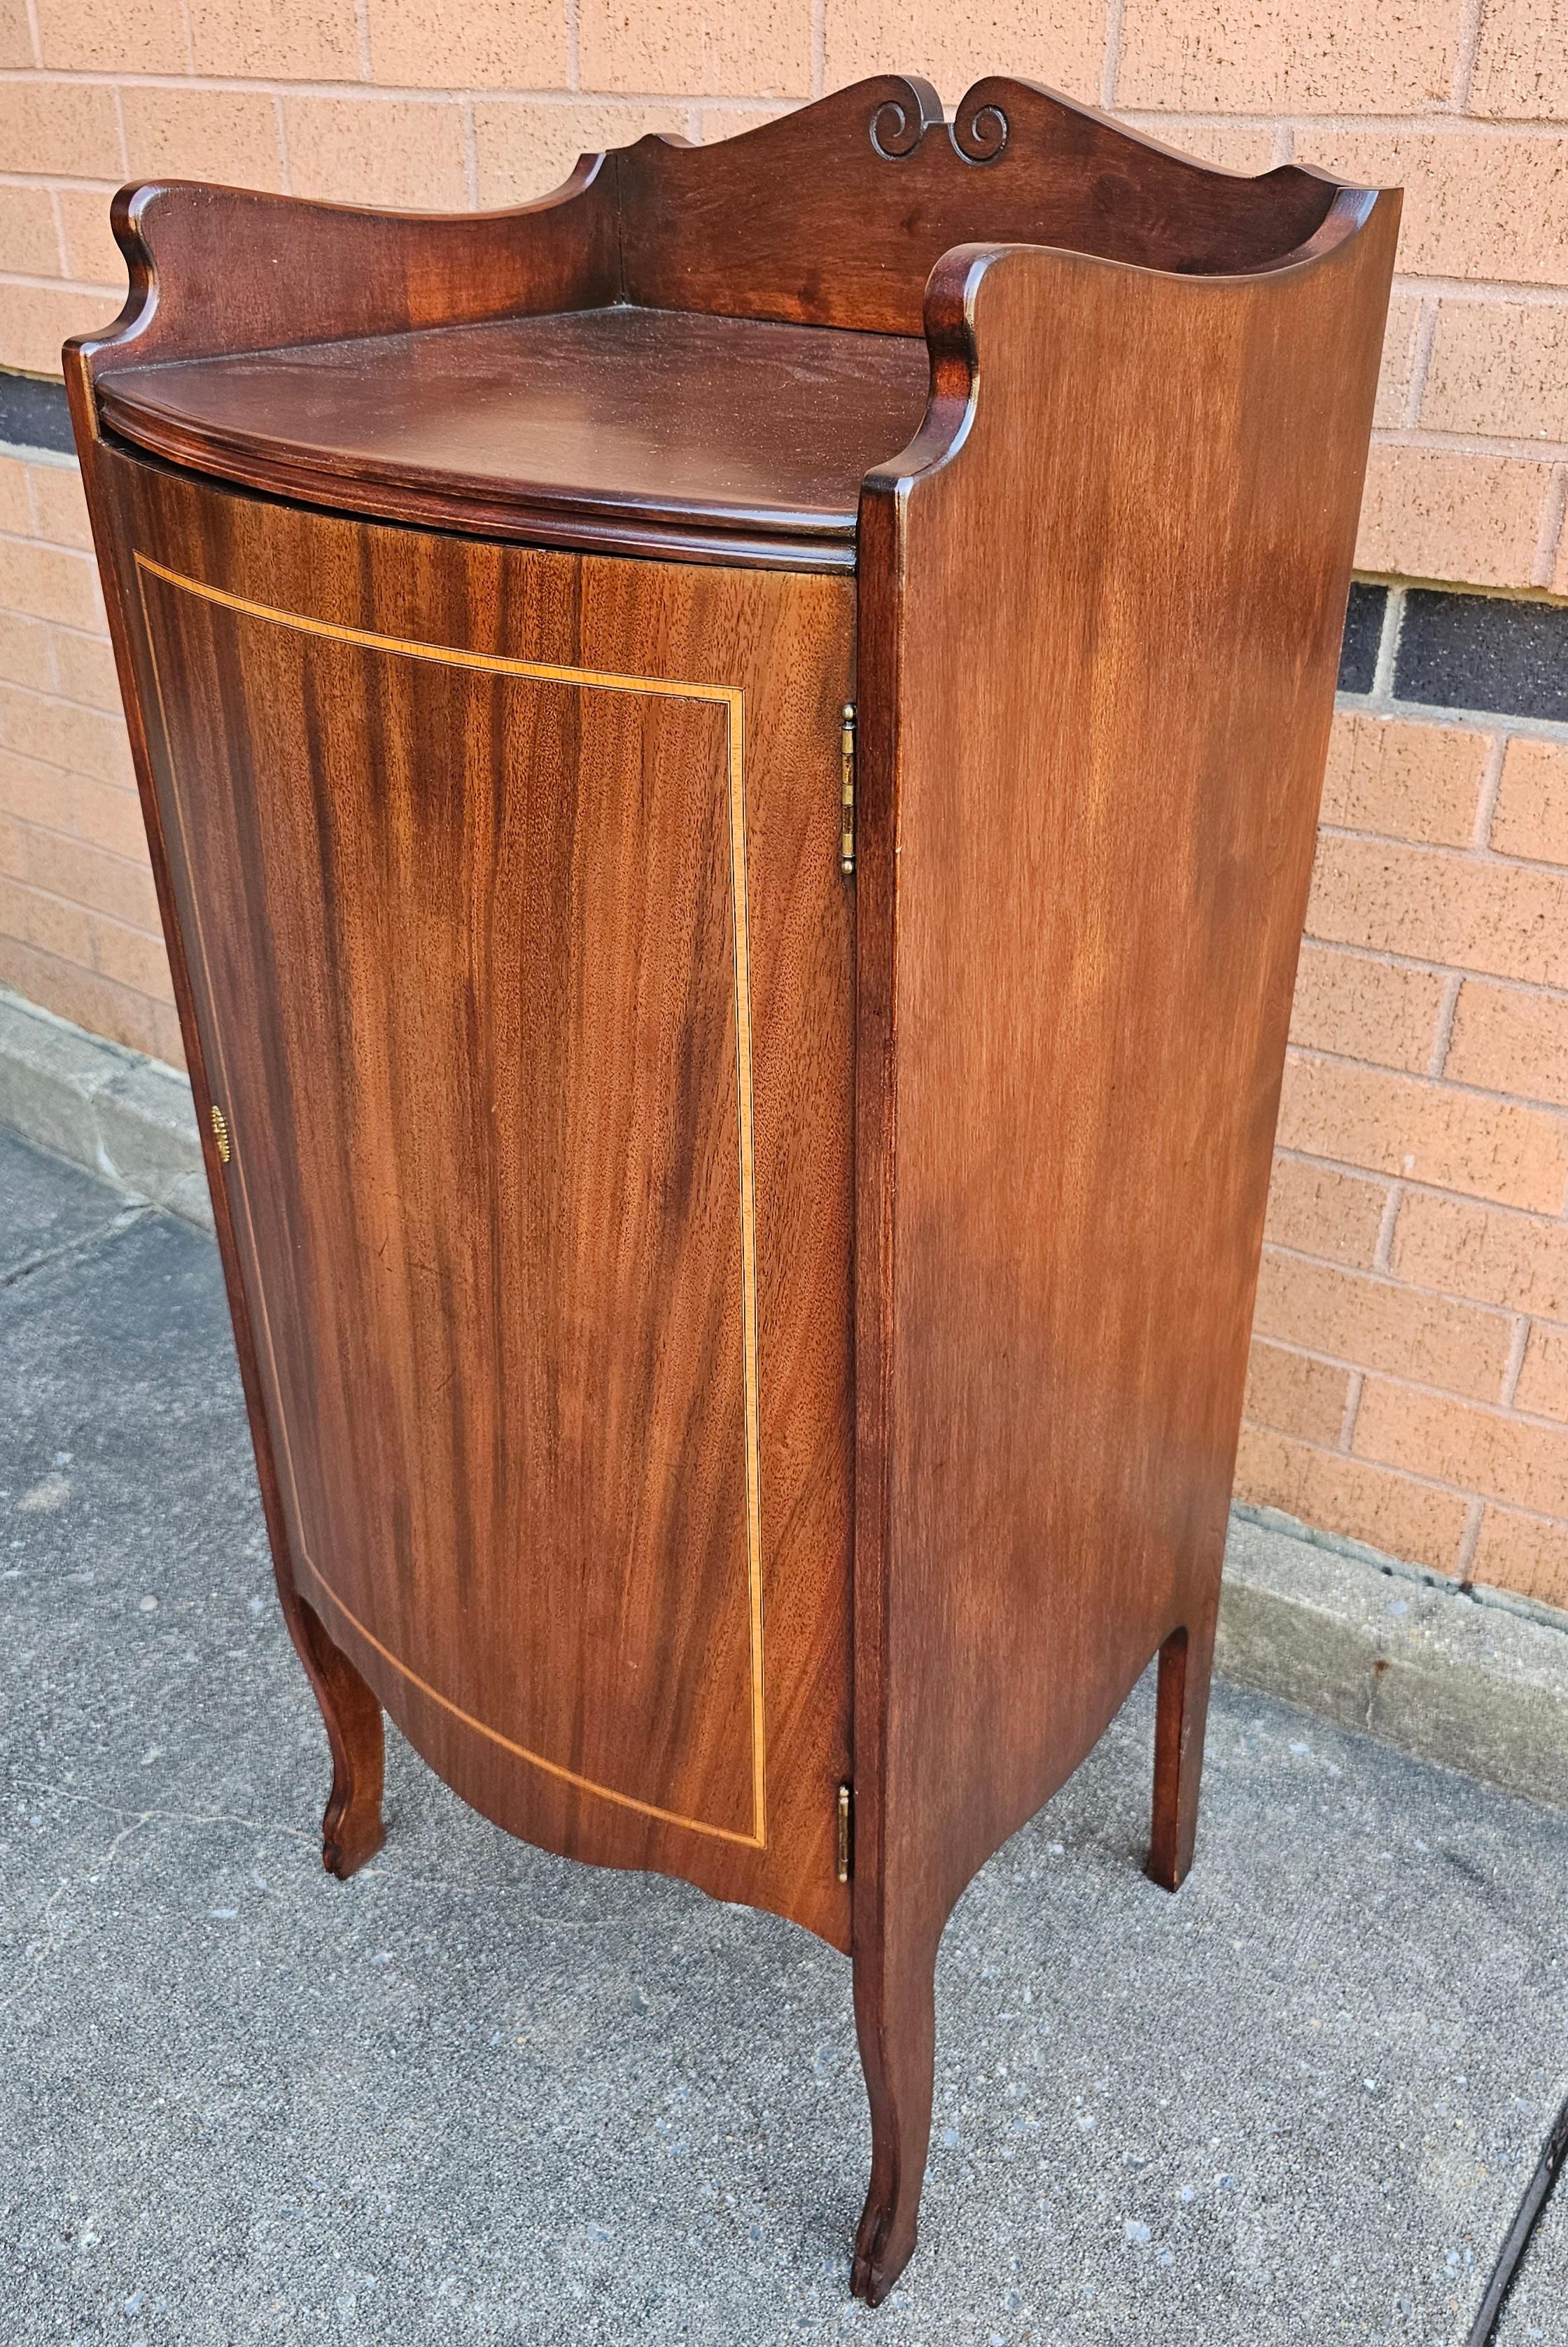 1930s Refinished Edwardian Mahogany and Satinwood Inlaid Sheet Music Cabinet For Sale 5